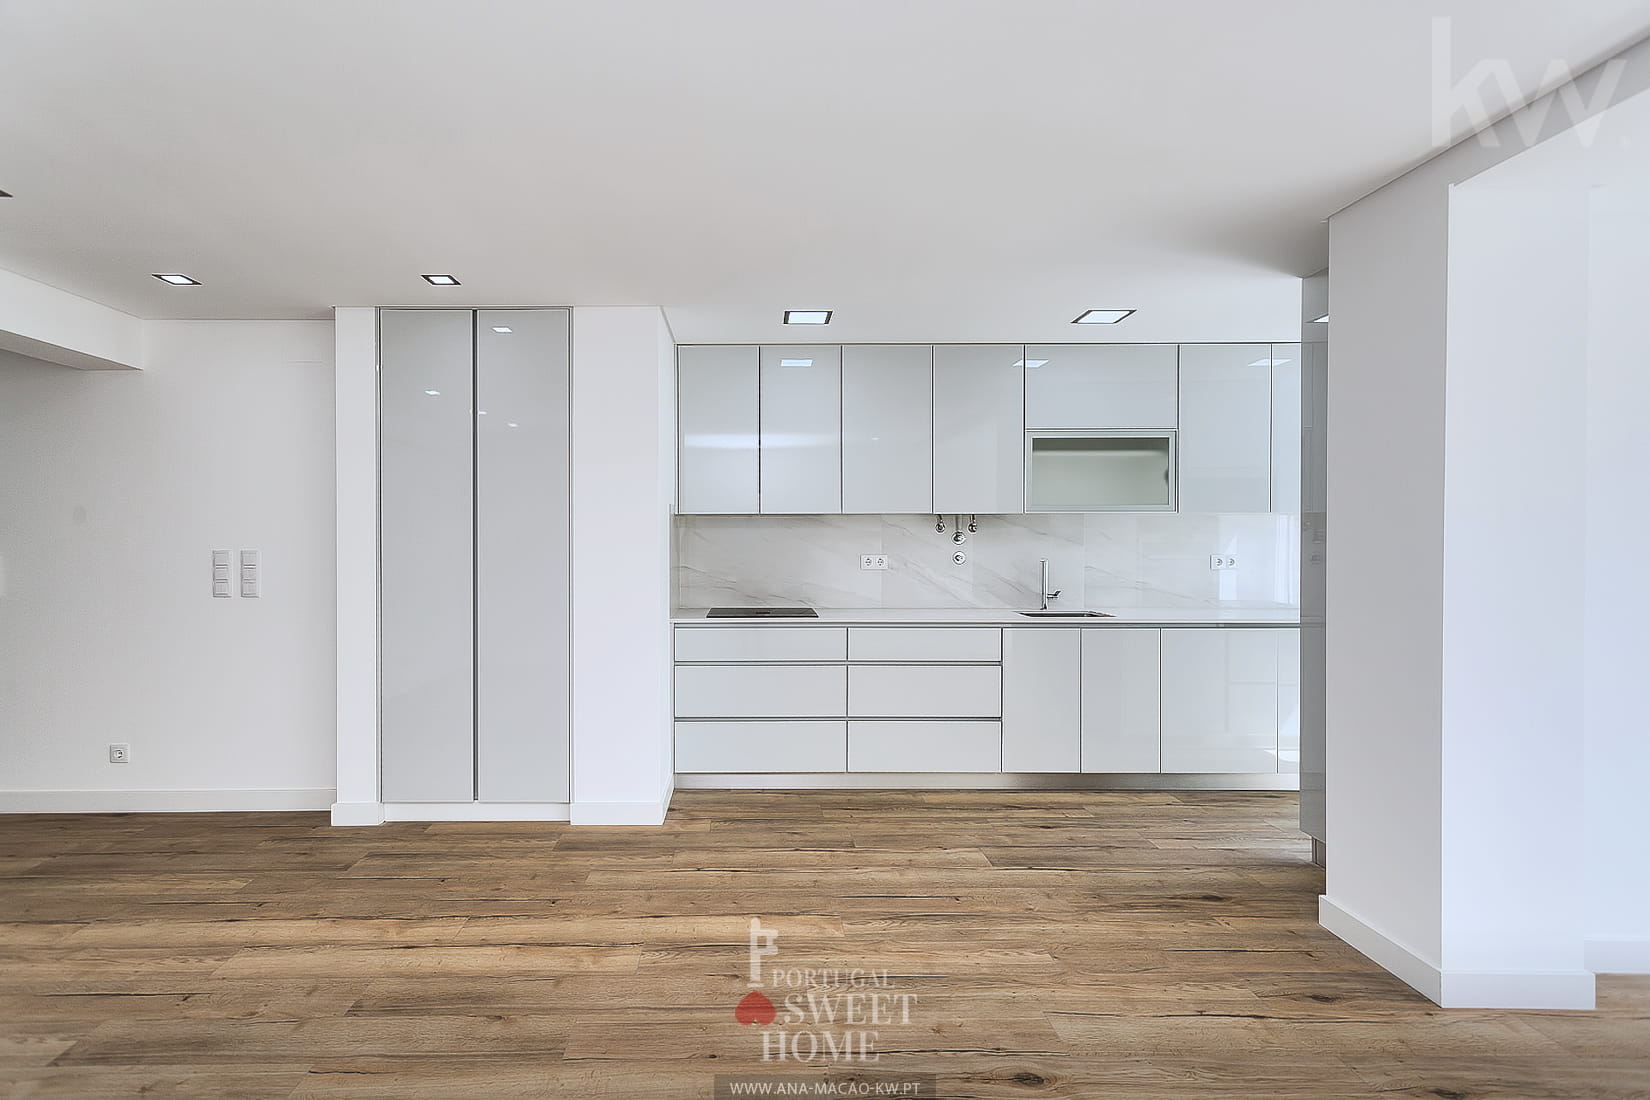 Integrated kitchen in the living space